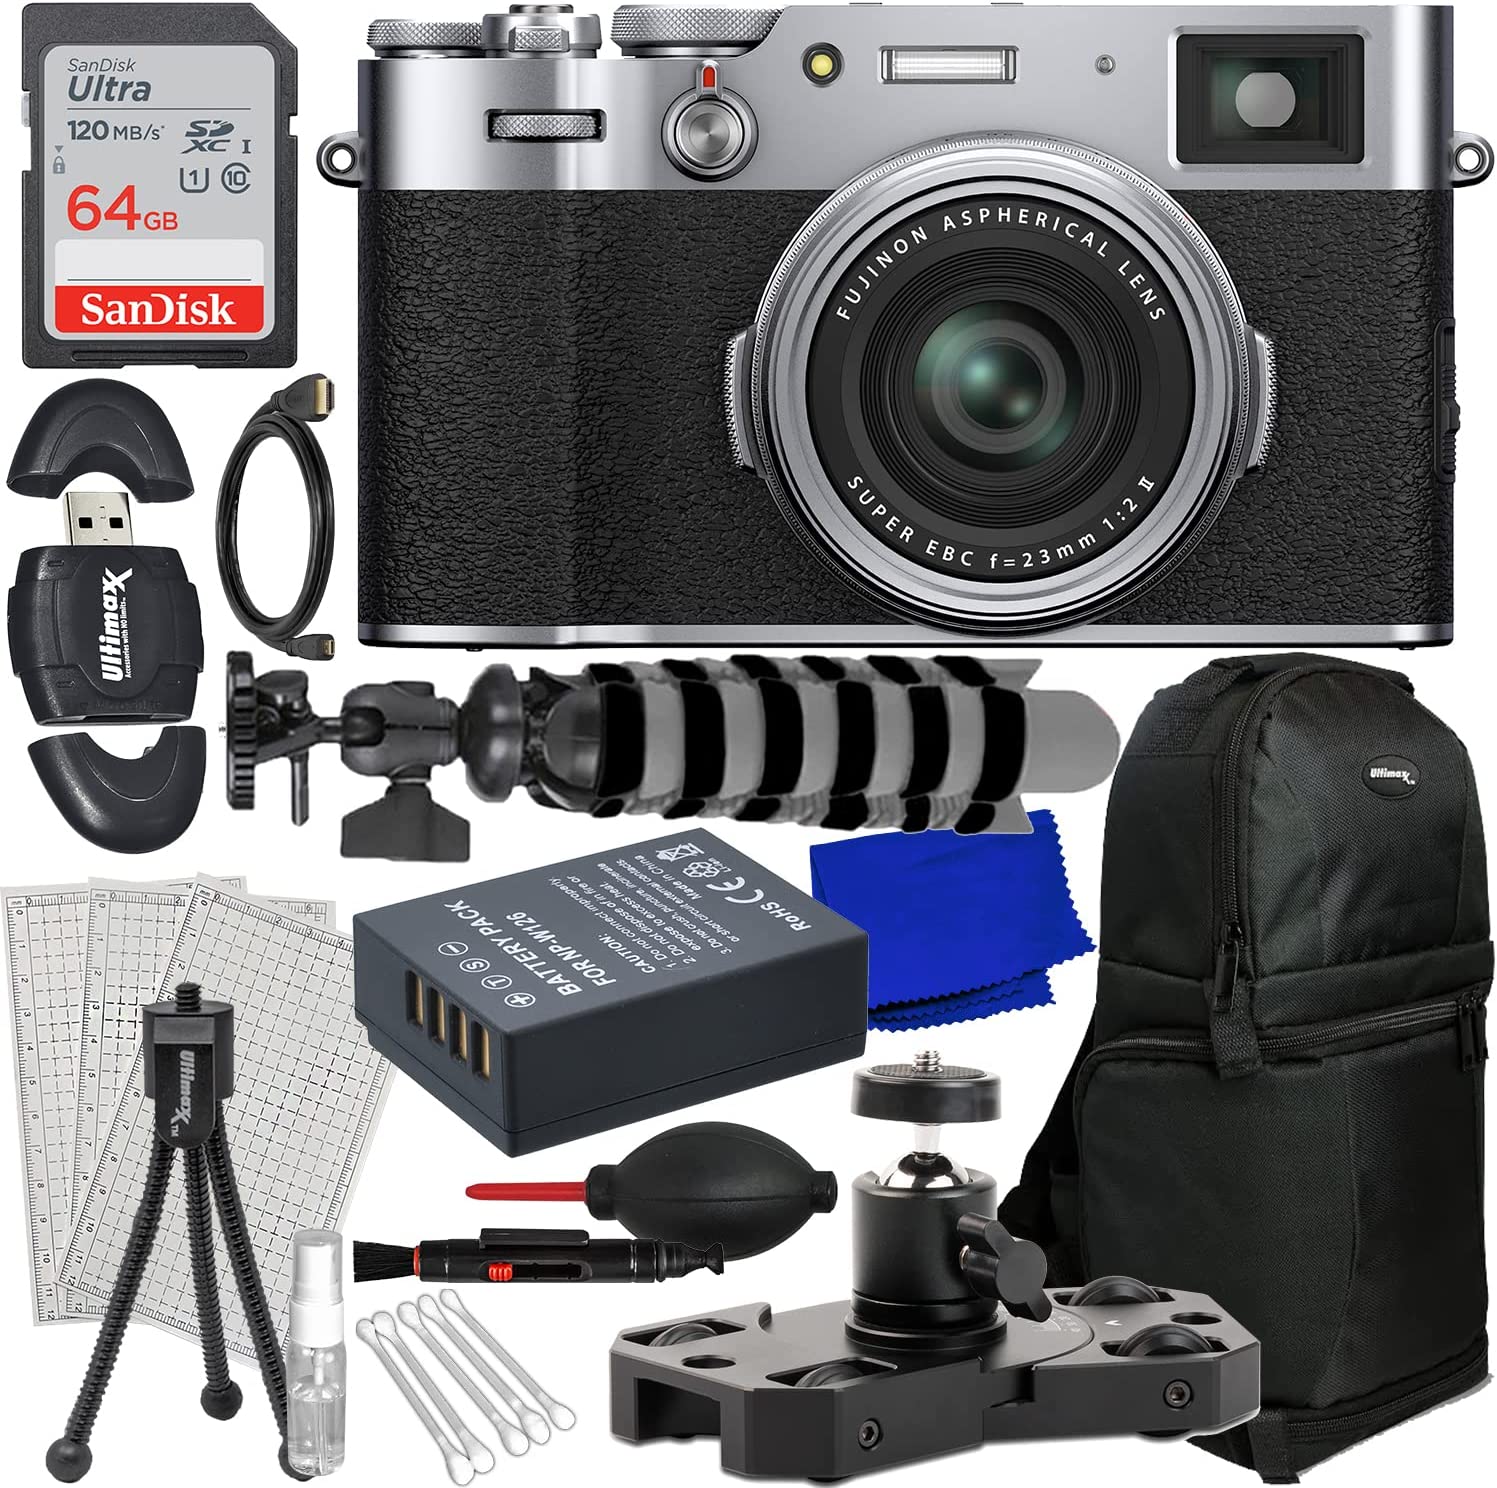 FUJIFILM X100V Digital Camera (Silver) + SanDisk 64GB Ultra SDXC, Spare Battery, Portable Mini Metal Camera Dolly, Water-Resistant Sling Backpack, Mini “Gripster” Tripod & Much More (23pc Bundle)